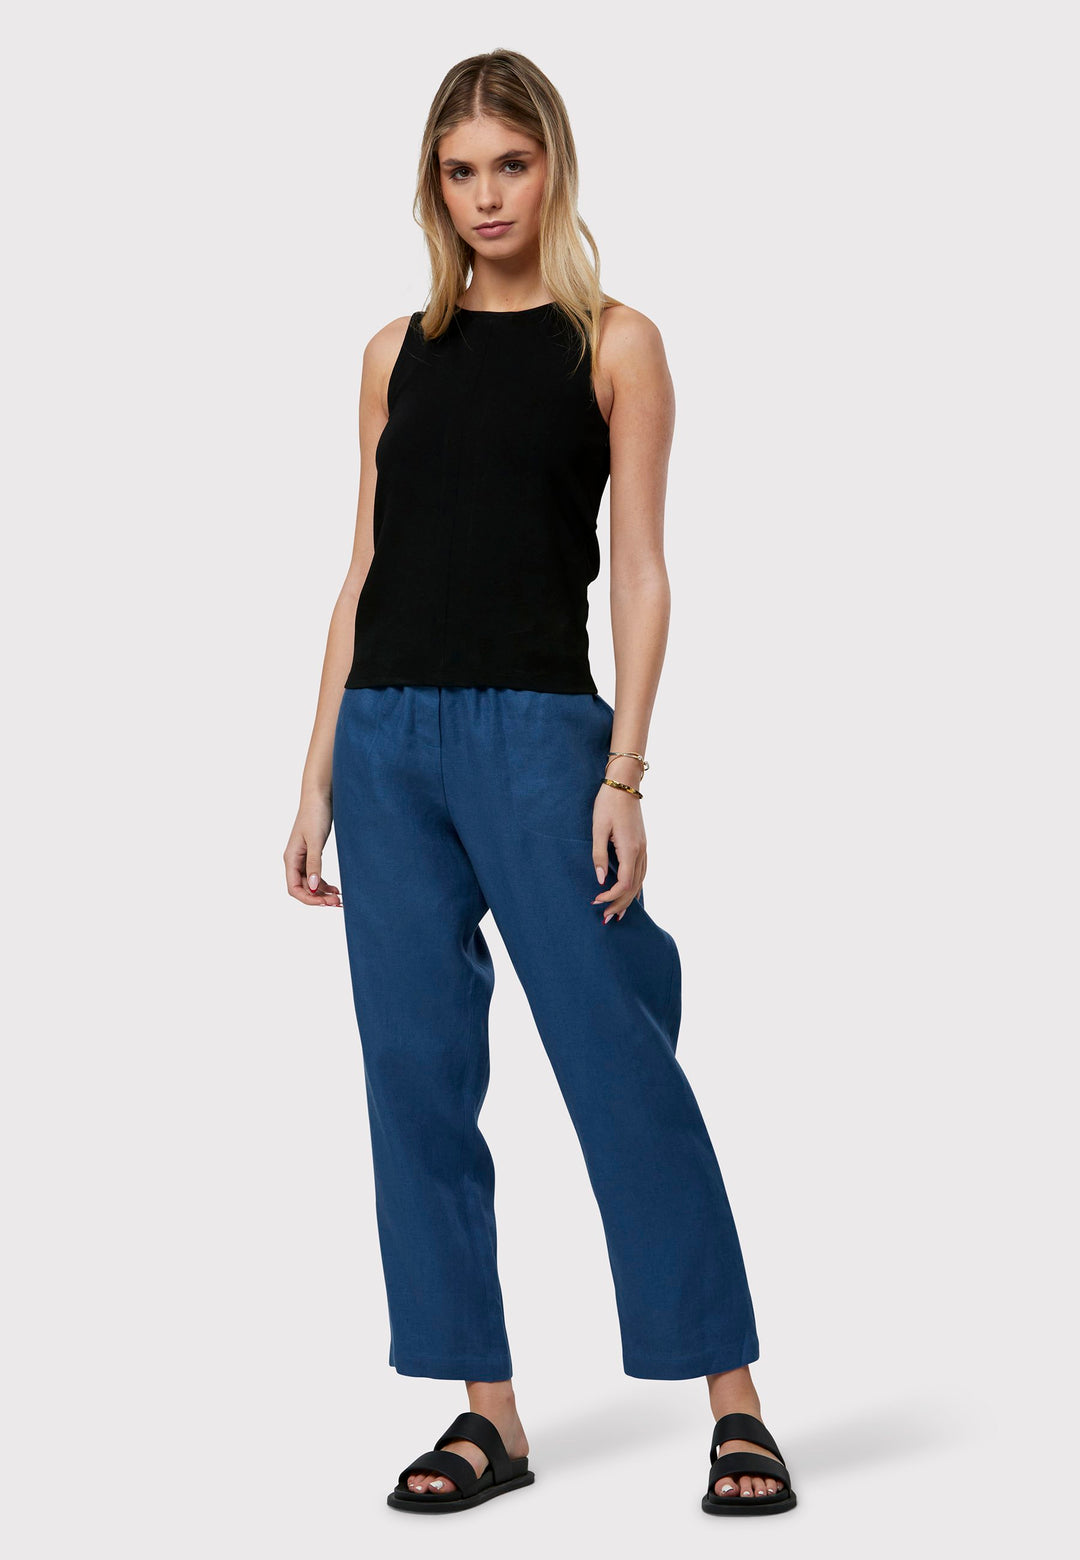 Choose the Vanessa borage blue pant. A loose-fitting, pull-on linen pant that embodies a laid-back spirit. A must-have piece for your travels. Designed to sit at the high waist for a flattering fit, it features an elasticated waistband. Pair it effortlessly with a simple tee and the coordinating Cassie boyfriend-blazer, complemented by trainers for a chic and contemporary ensemble.